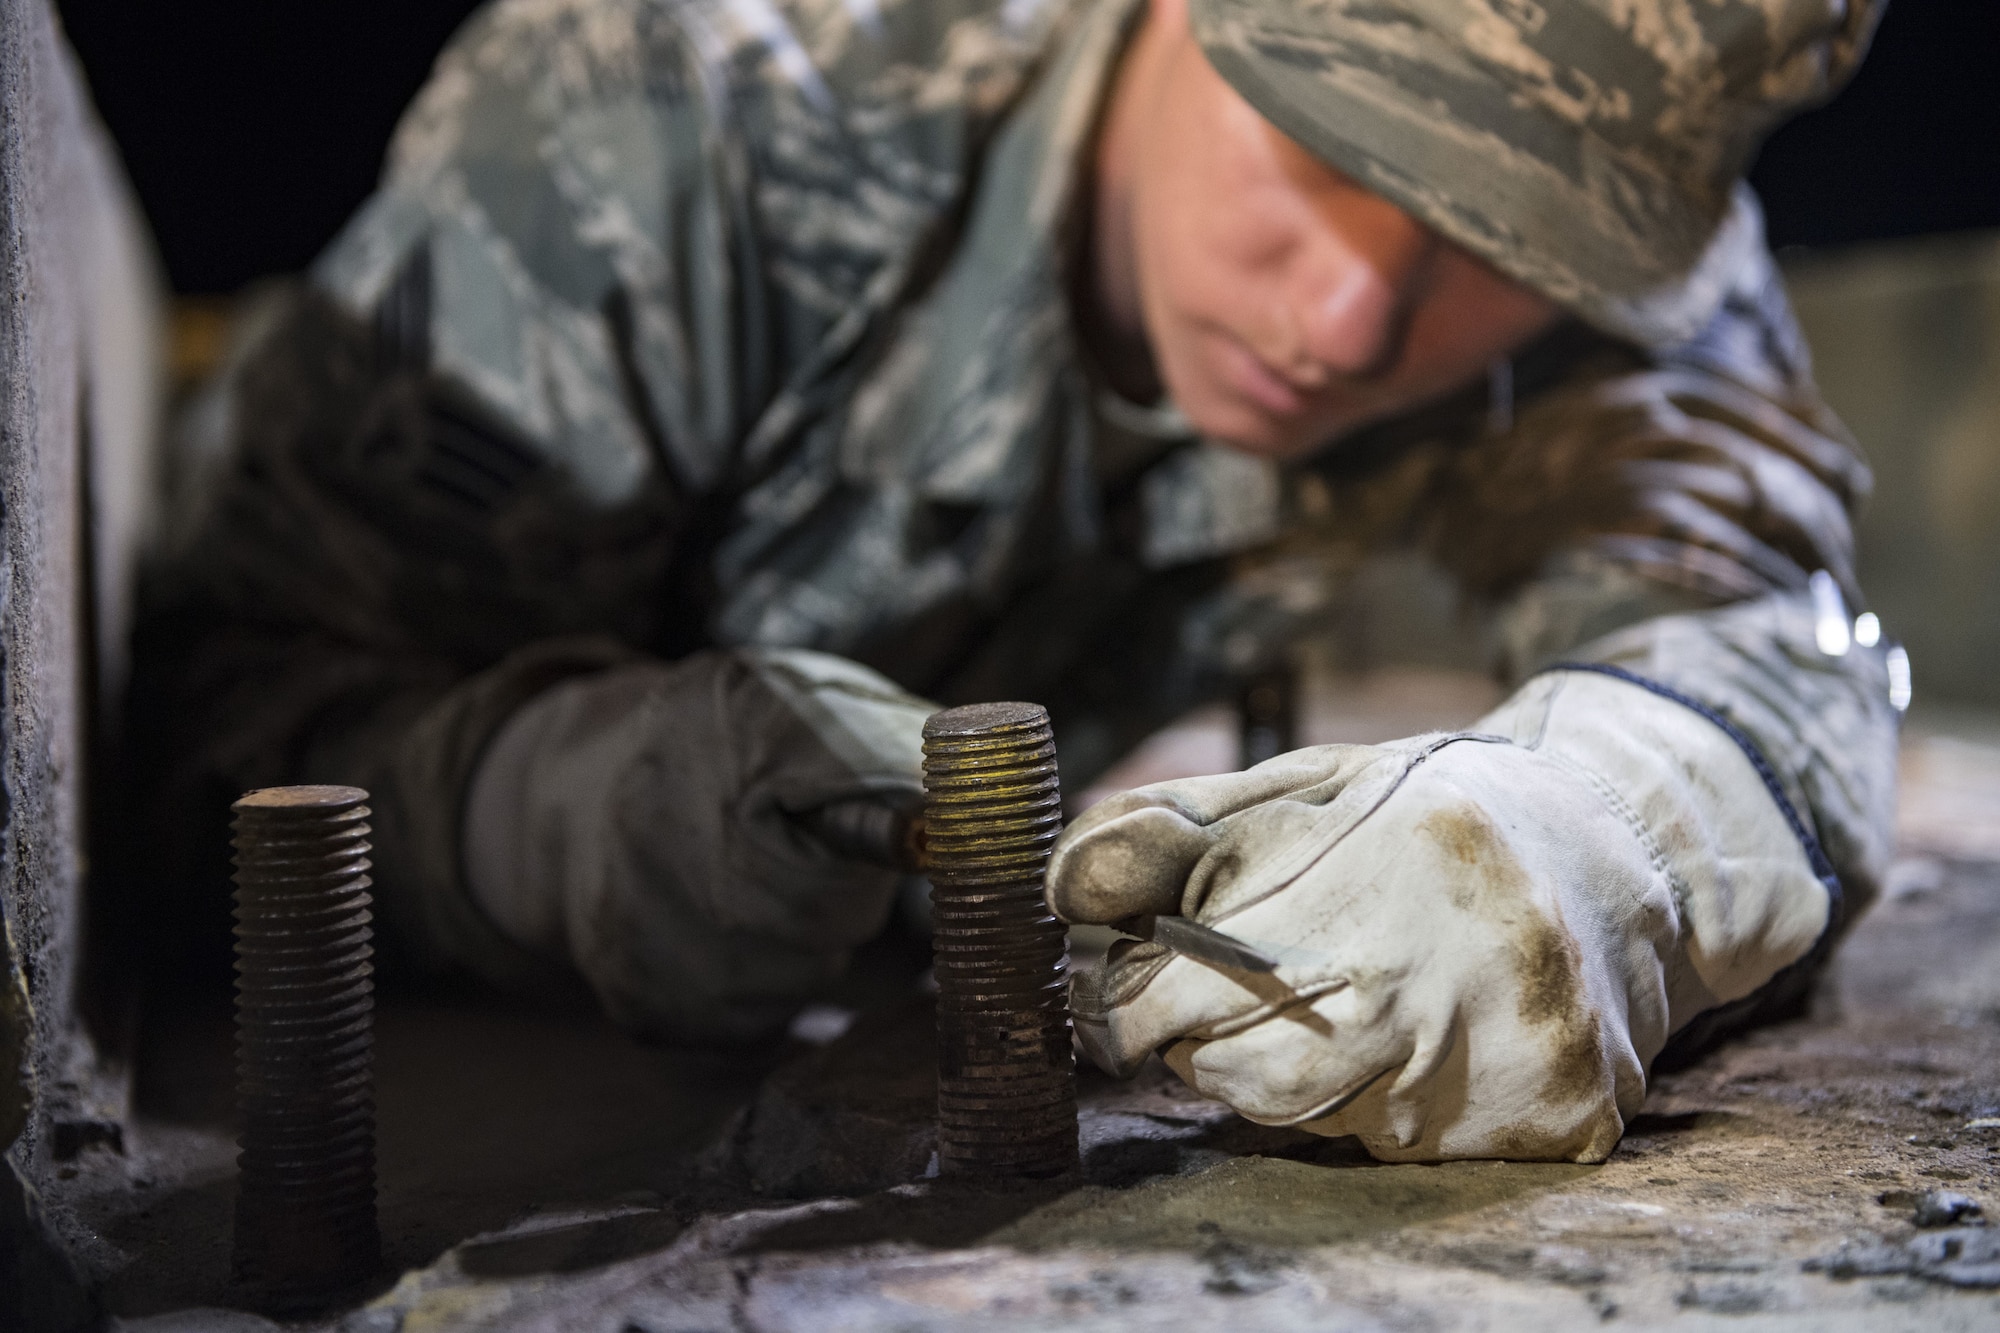 Senior Airman Matthew Melton, 23d Civil Engineer Squadron power production journeyman, clears the threads on a bolt, Nov. 15, 2017, at Moody Air Force Base, Ga. The bolts will hold a fairlead beam in place which is a part of a BAK-12 arresting system that is used on the runway to slow down fighter aircraft in emergency situations. (U.S. Air Force photo by Senior Airman Janiqua P. Robinson)